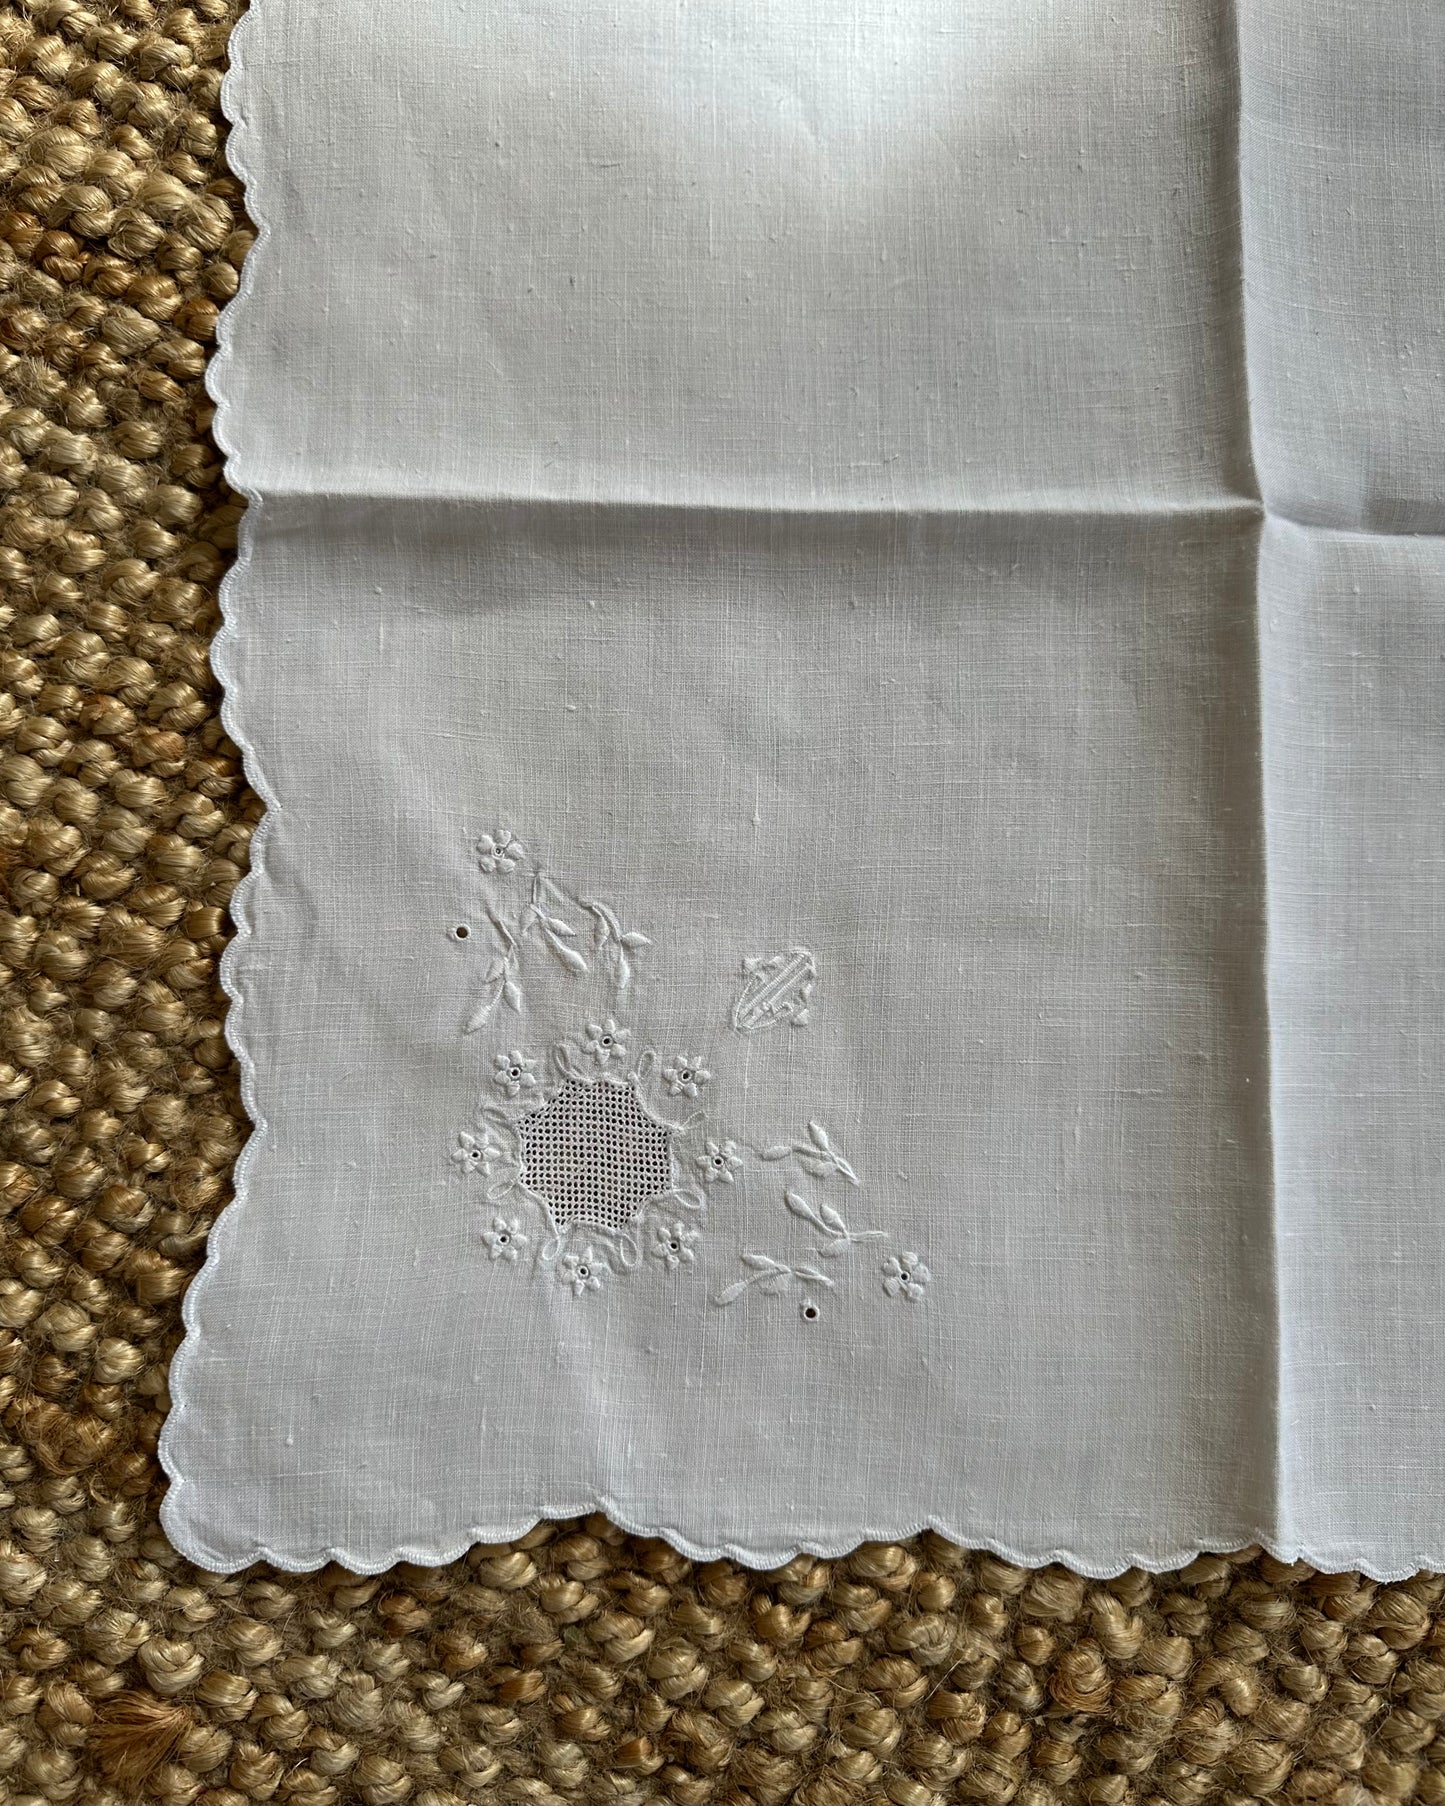 Set of 10 Napkins with a Scalloped Edge